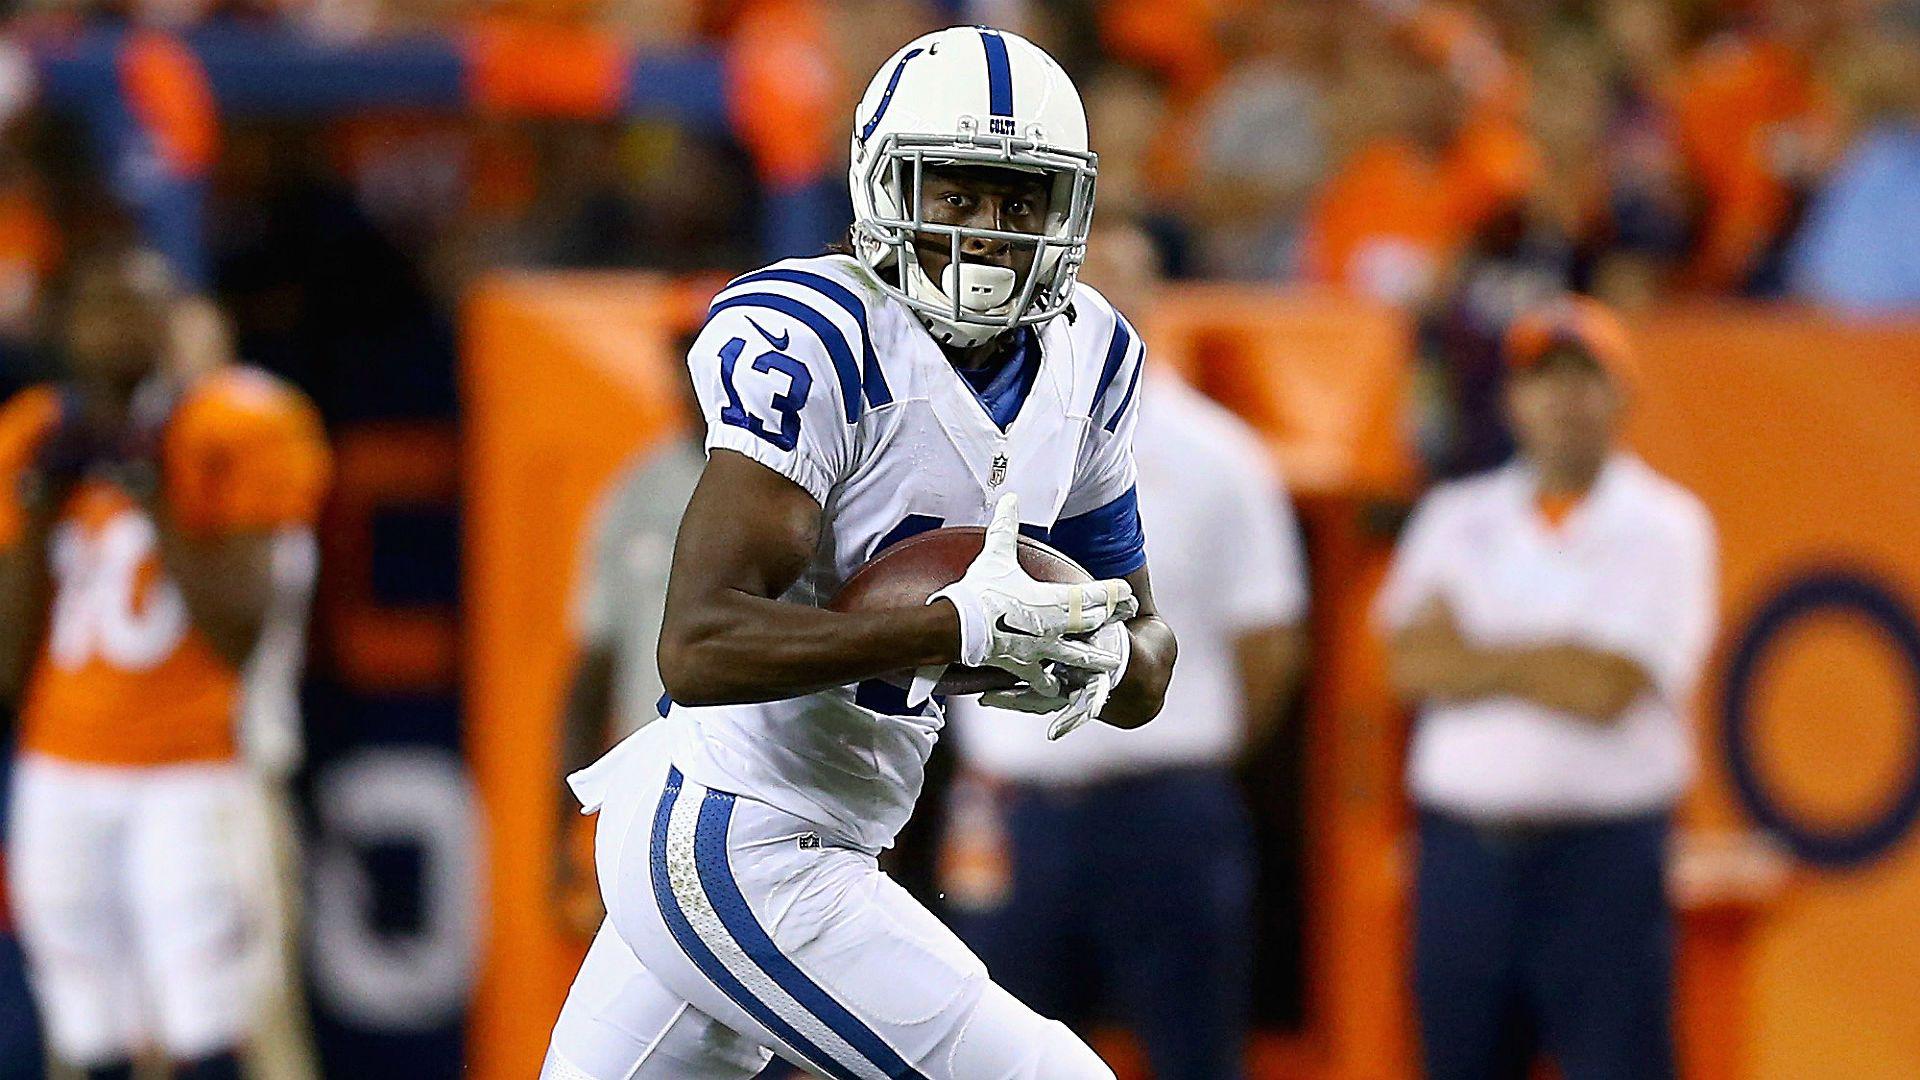 You may call Colts wideout T.Y. Hilton 'The Ghost' from now